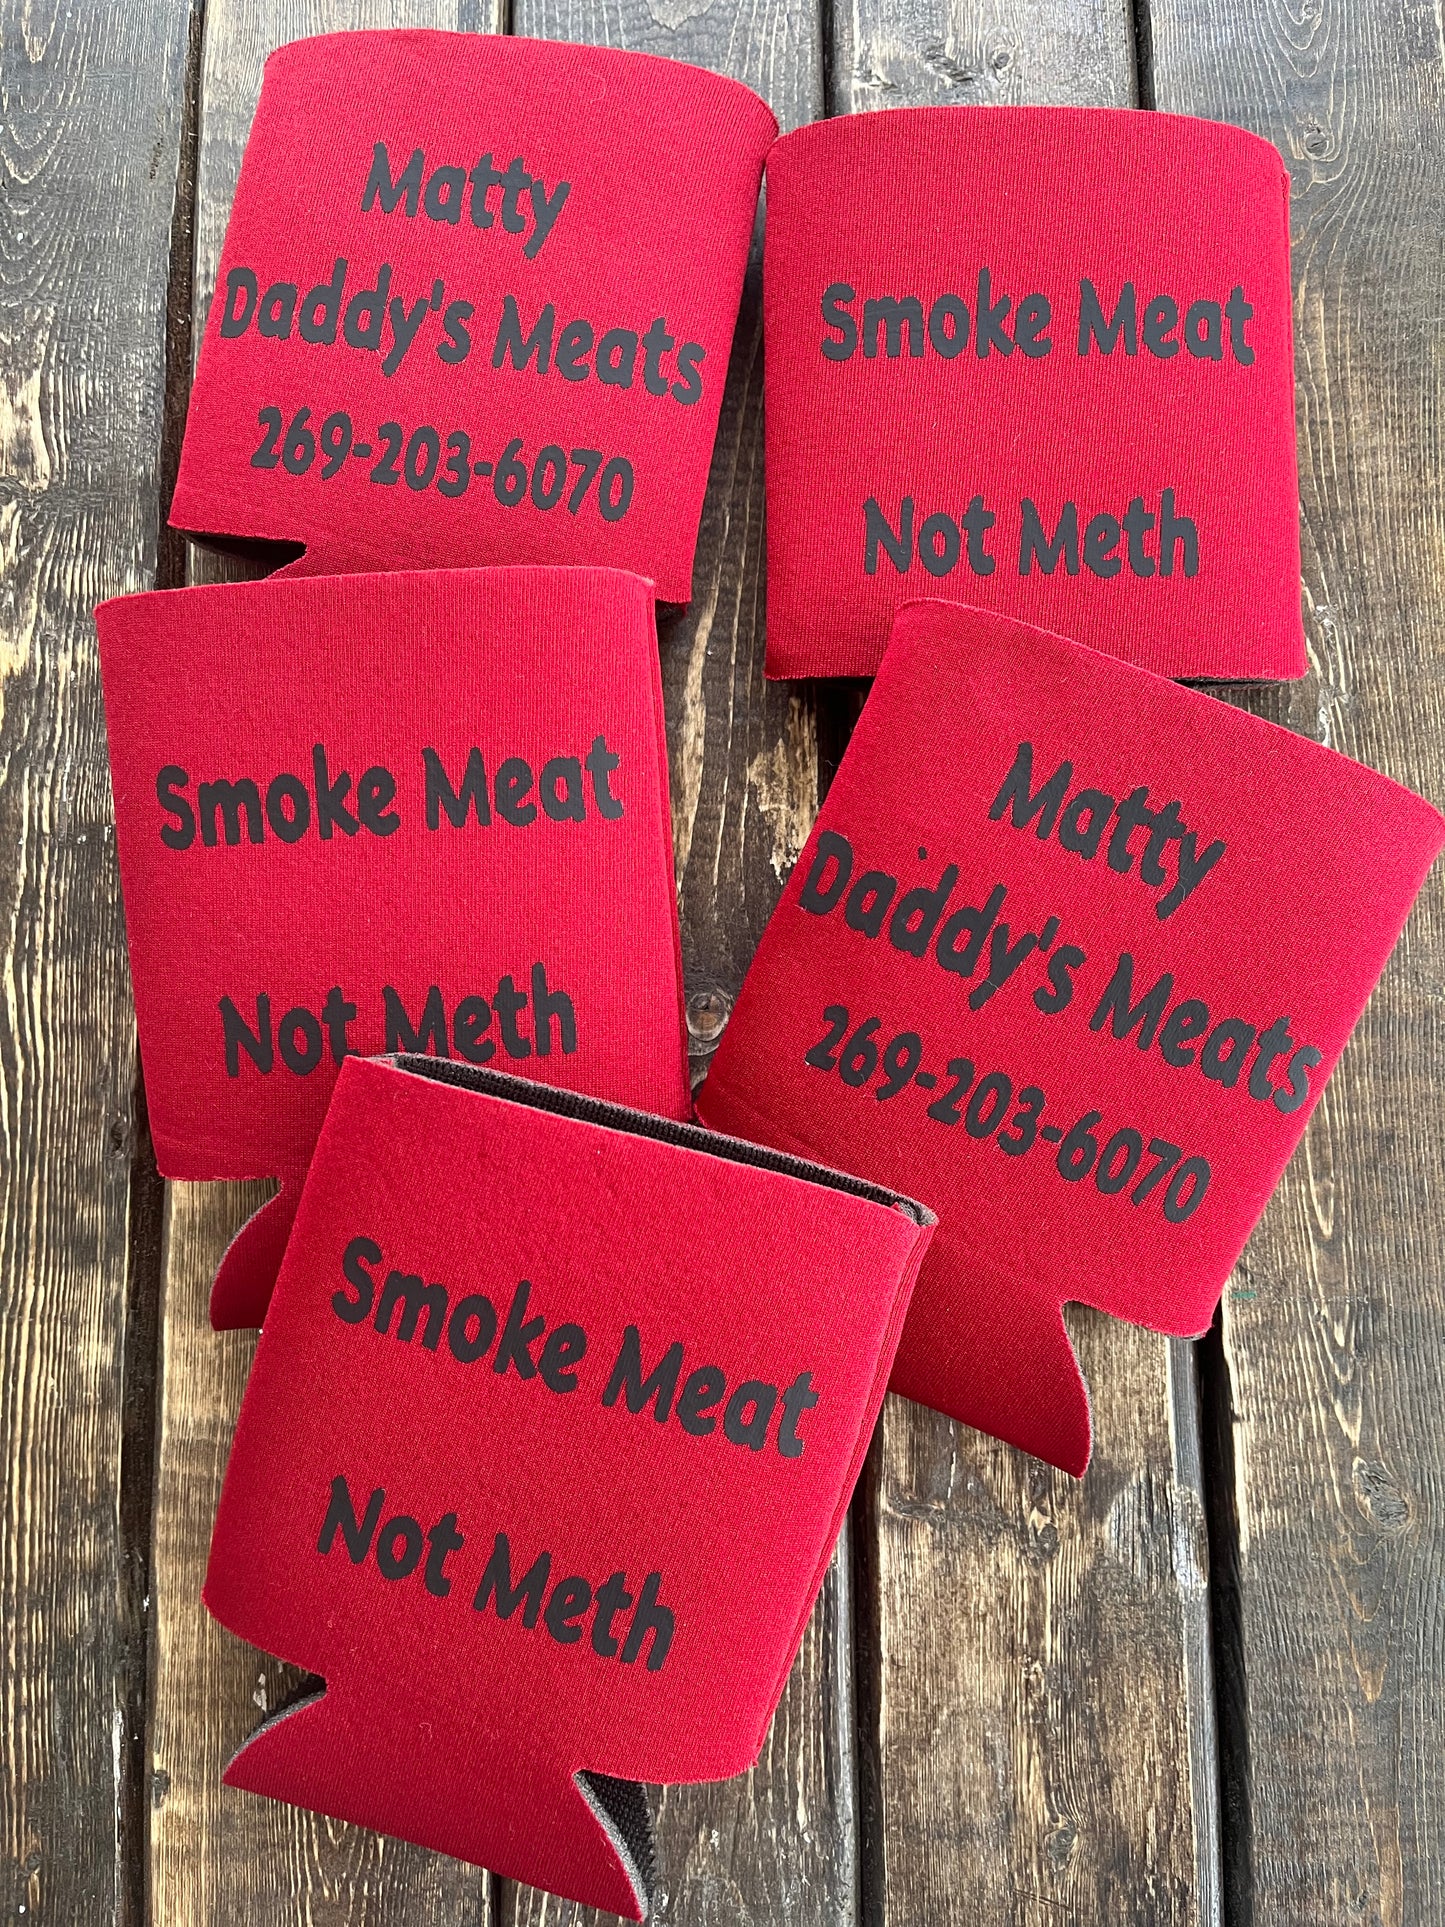 Smoke Meat Not Meth 12oz Coozie